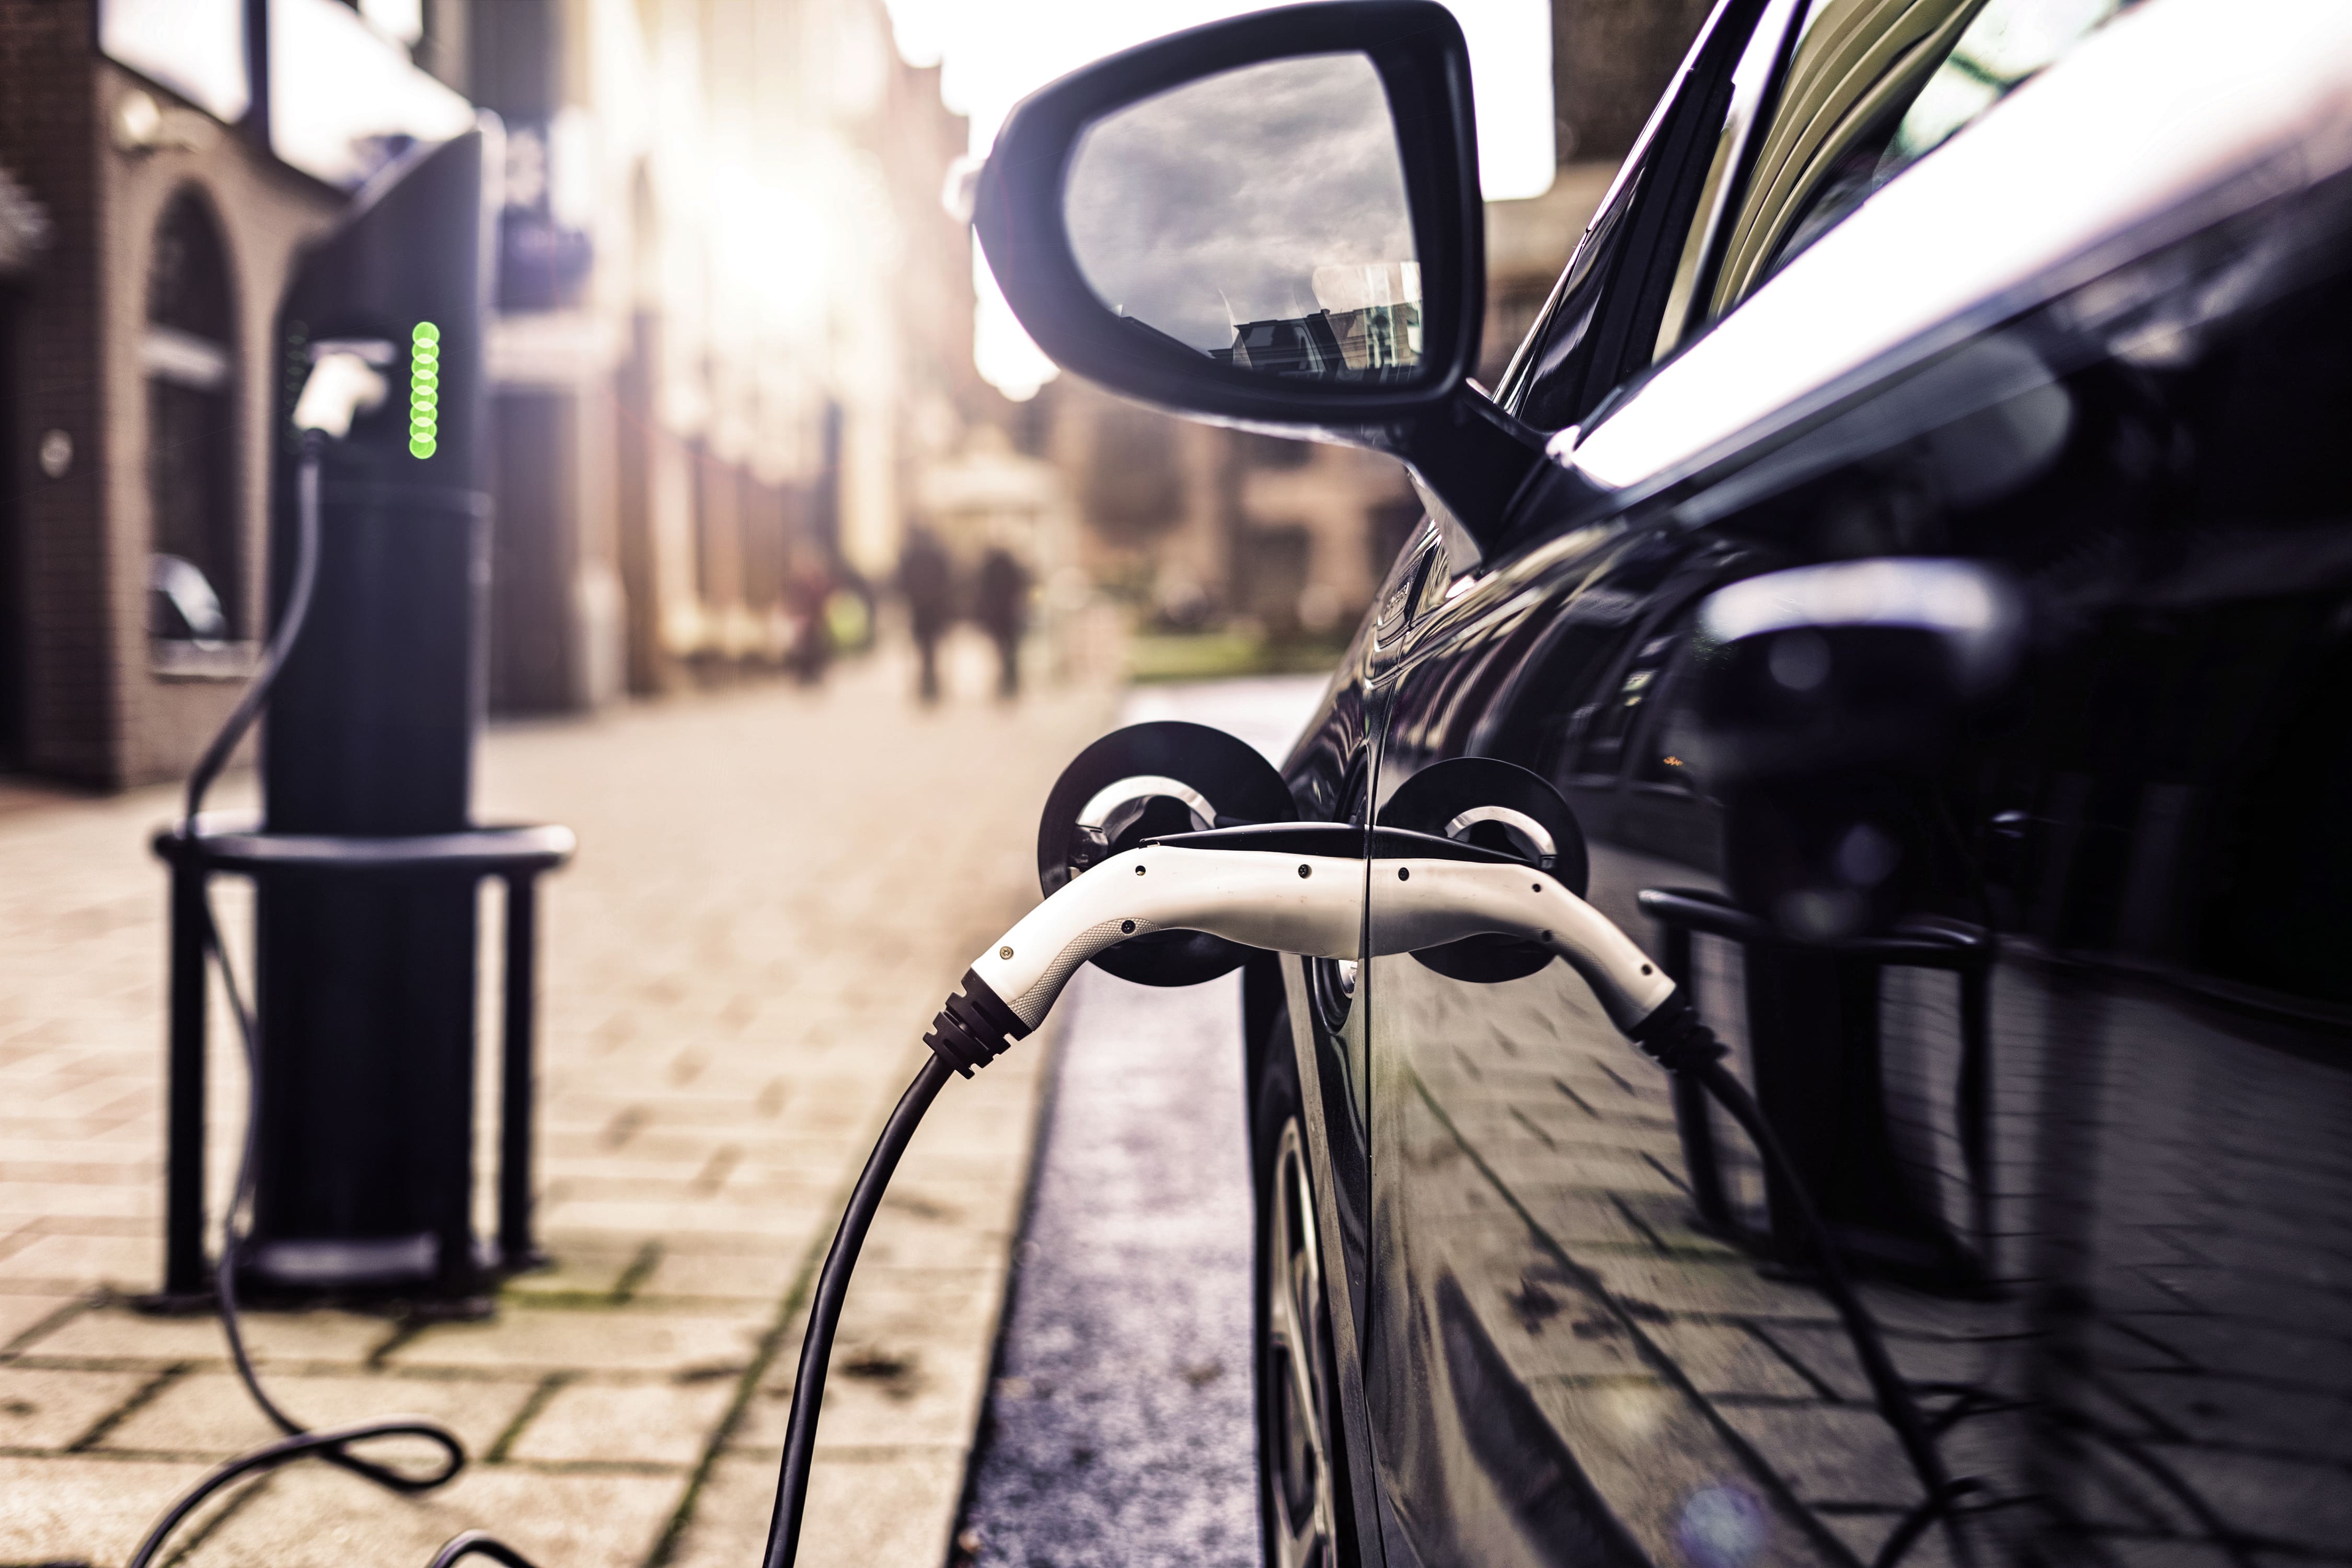 Effective electric vehicle launch in Europe – Thinking beyond big markets